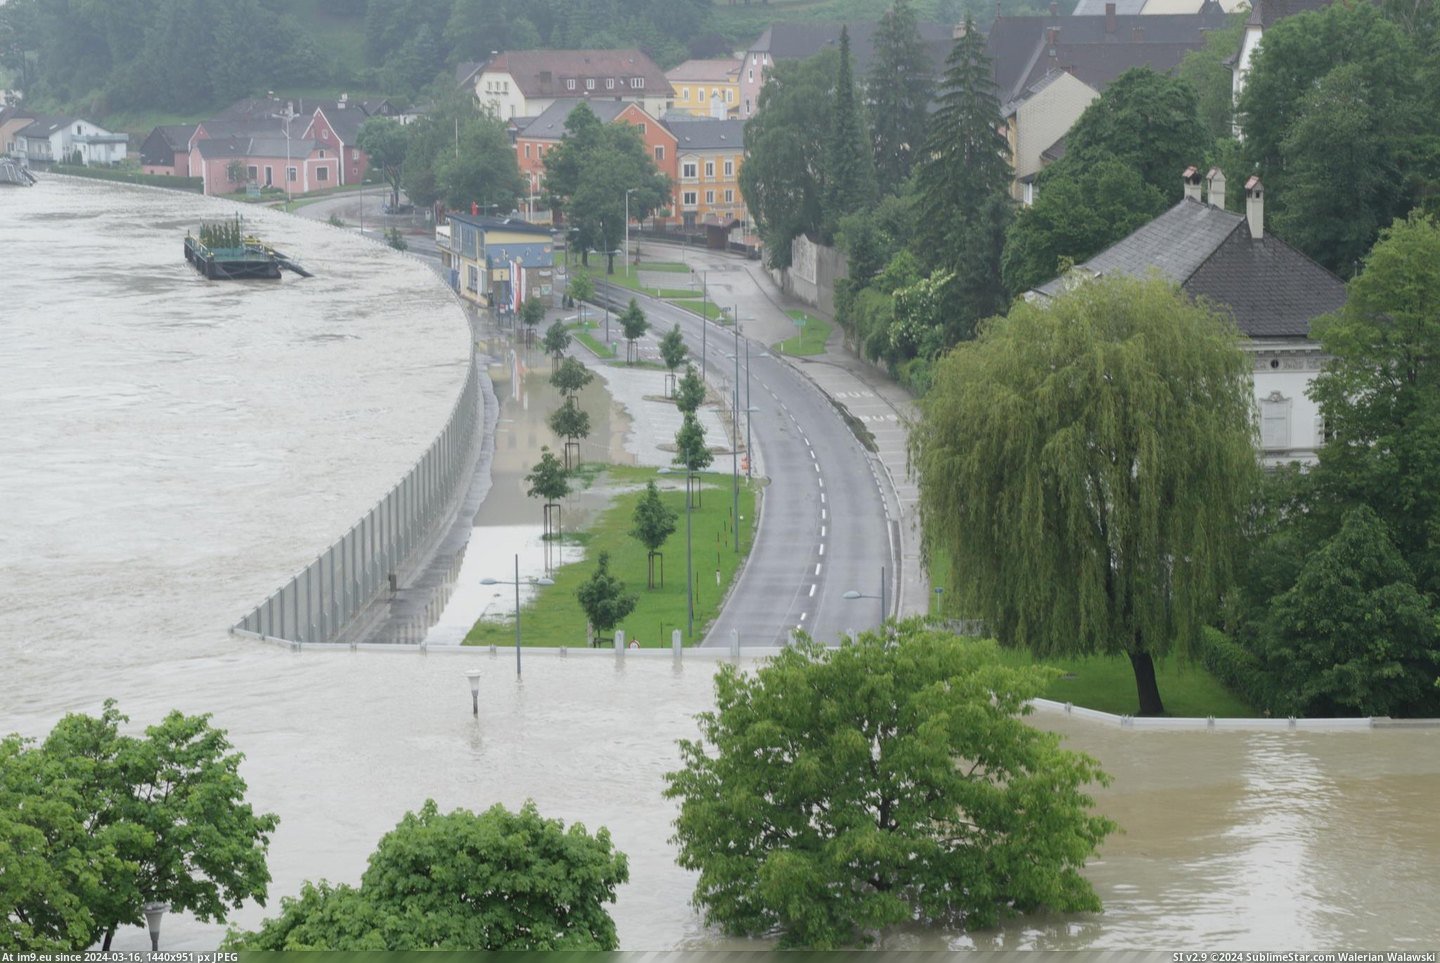 #Amazing #Wall #Engineering #Feat #Flood #Austria #Mobile [Pics] Mobile flood wall in Austria, amazing feat of engineering. Pic. (Image of album My r/PICS favs))